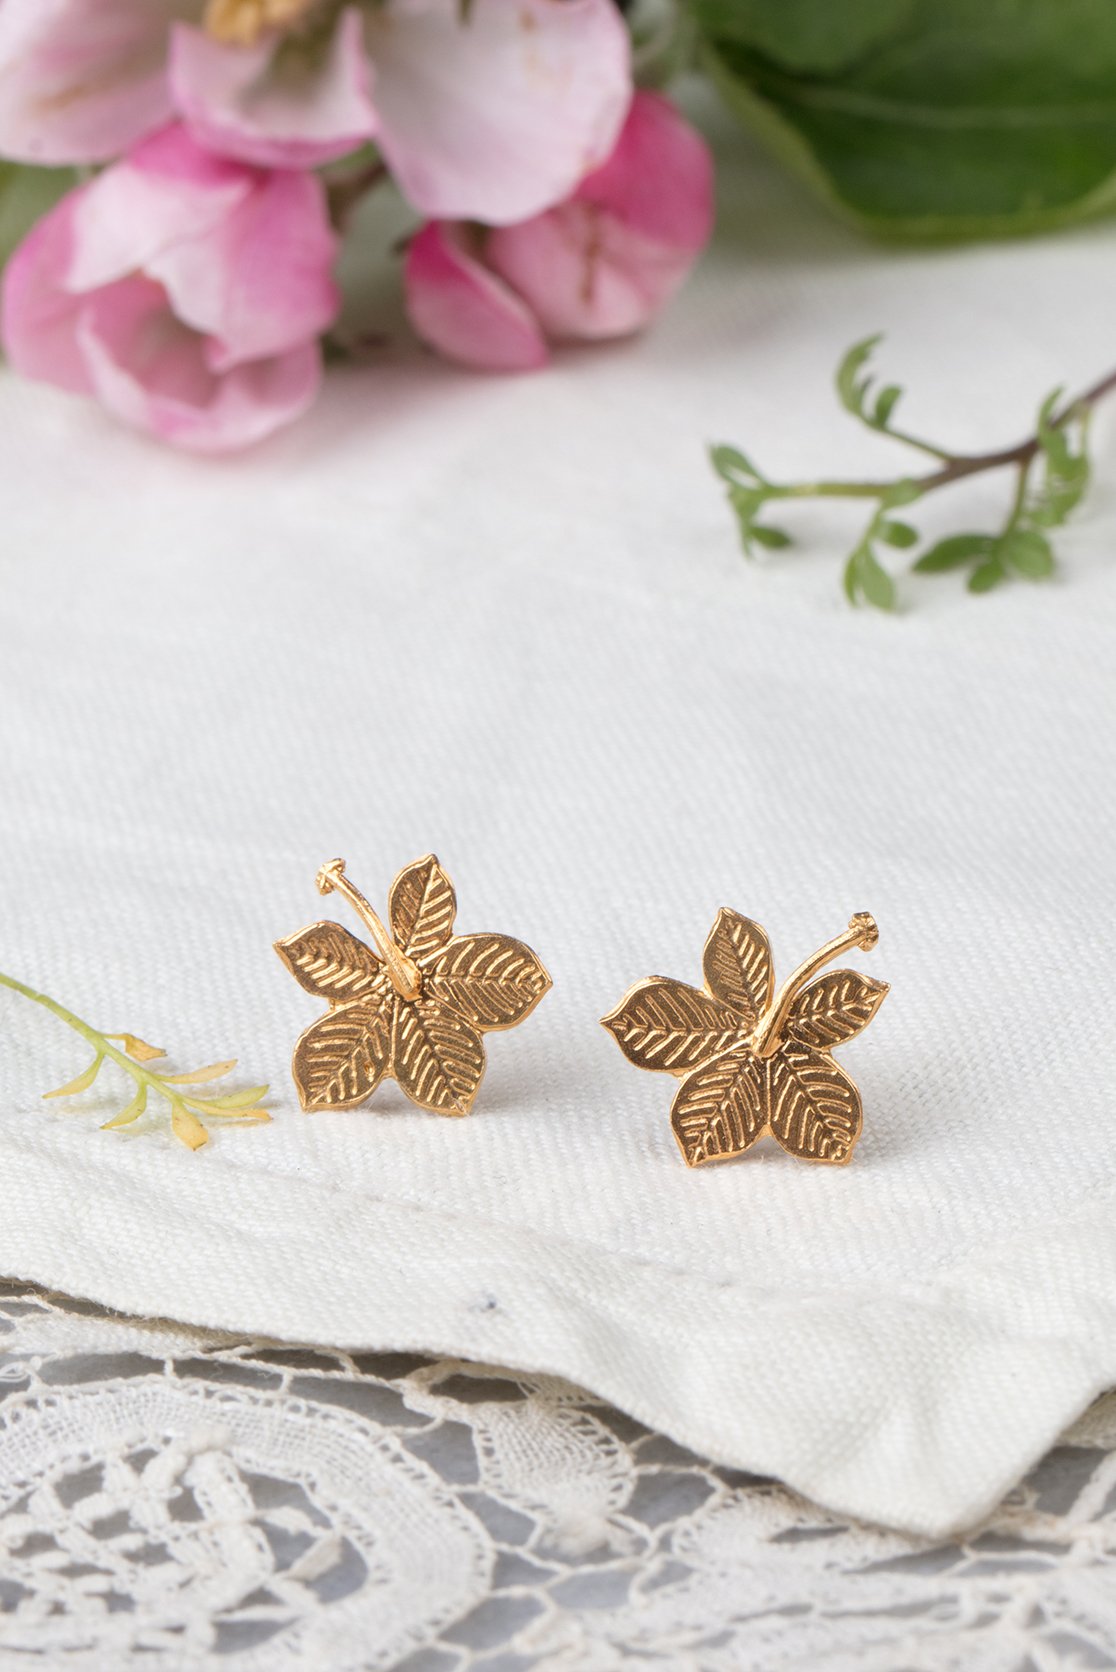 sycamore leaf earrings in 22ct gold plate and silver